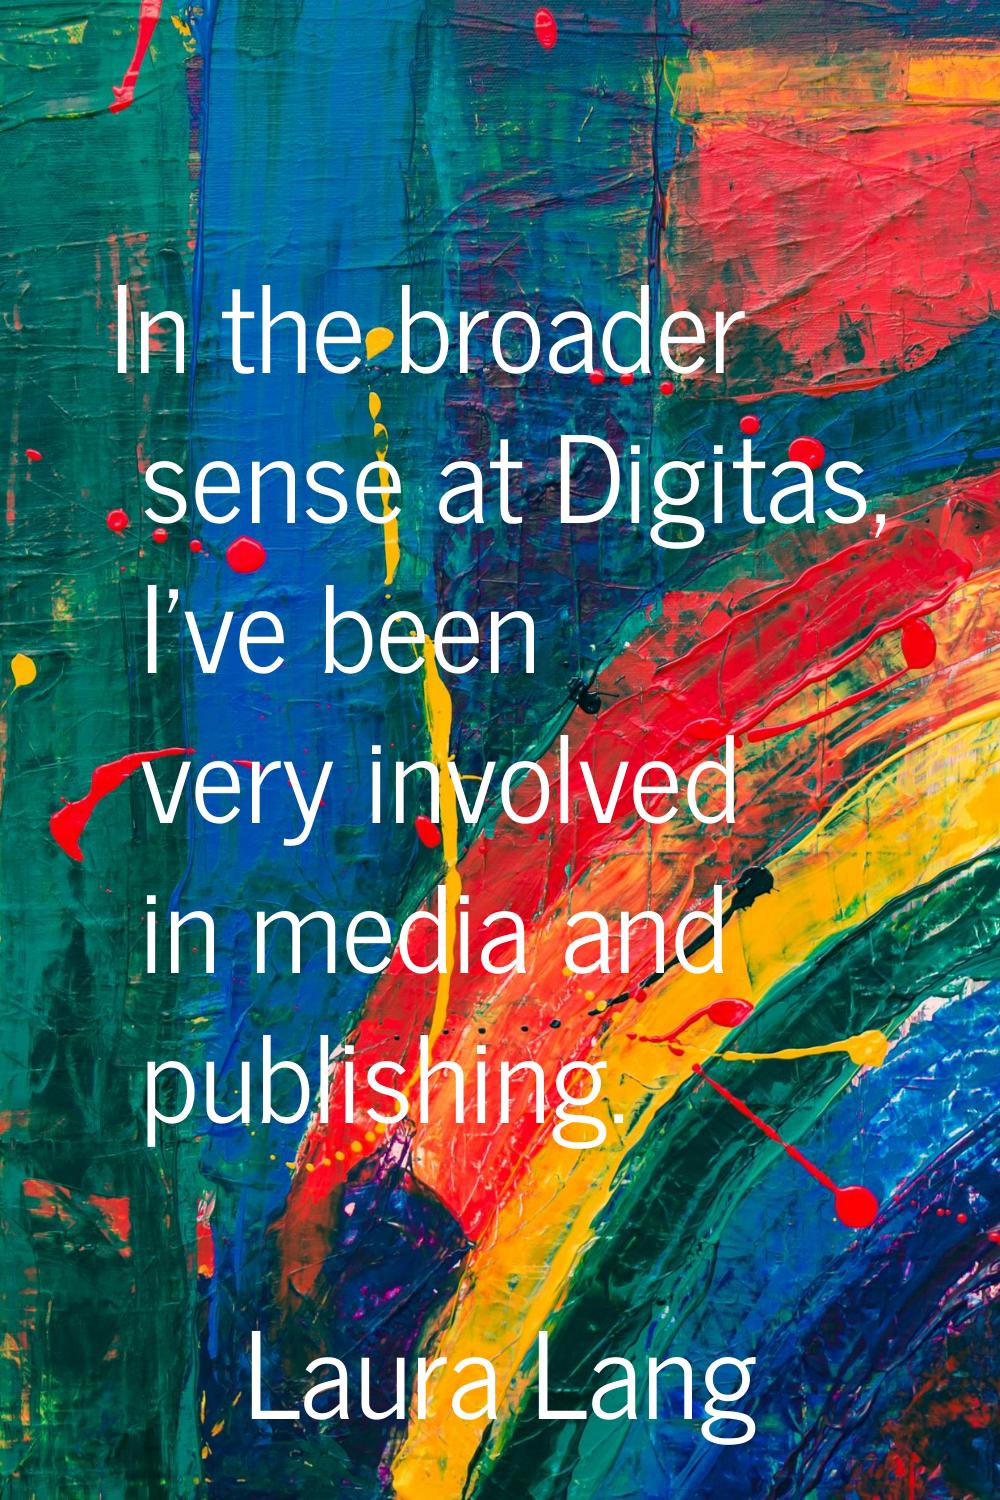 In the broader sense at Digitas, I've been very involved in media and publishing.